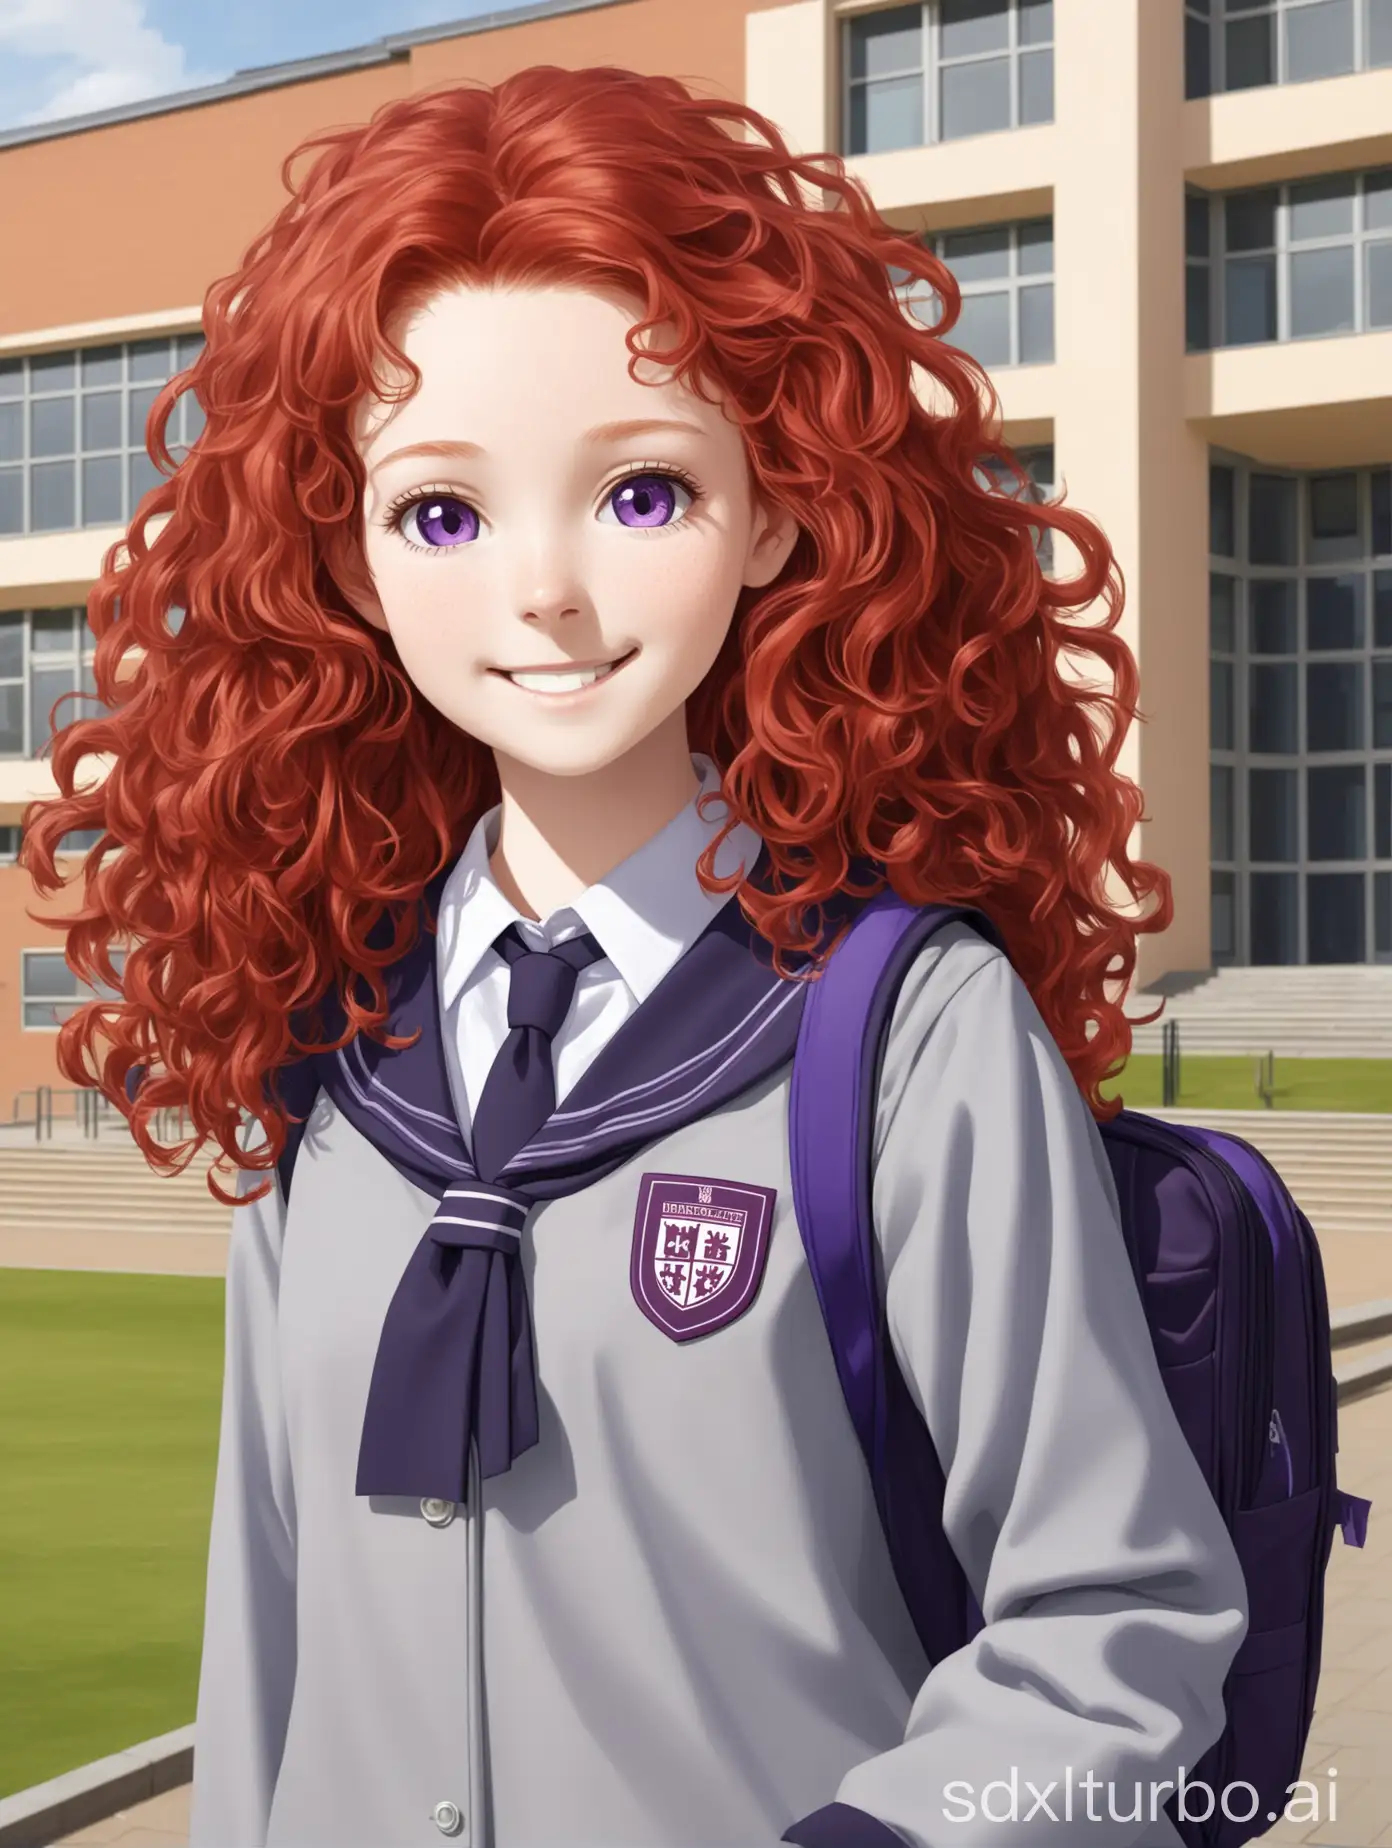 A redhead student girl, with frizzy hair, smiling, wearing a grey and purple university uniform, in front of a building facade